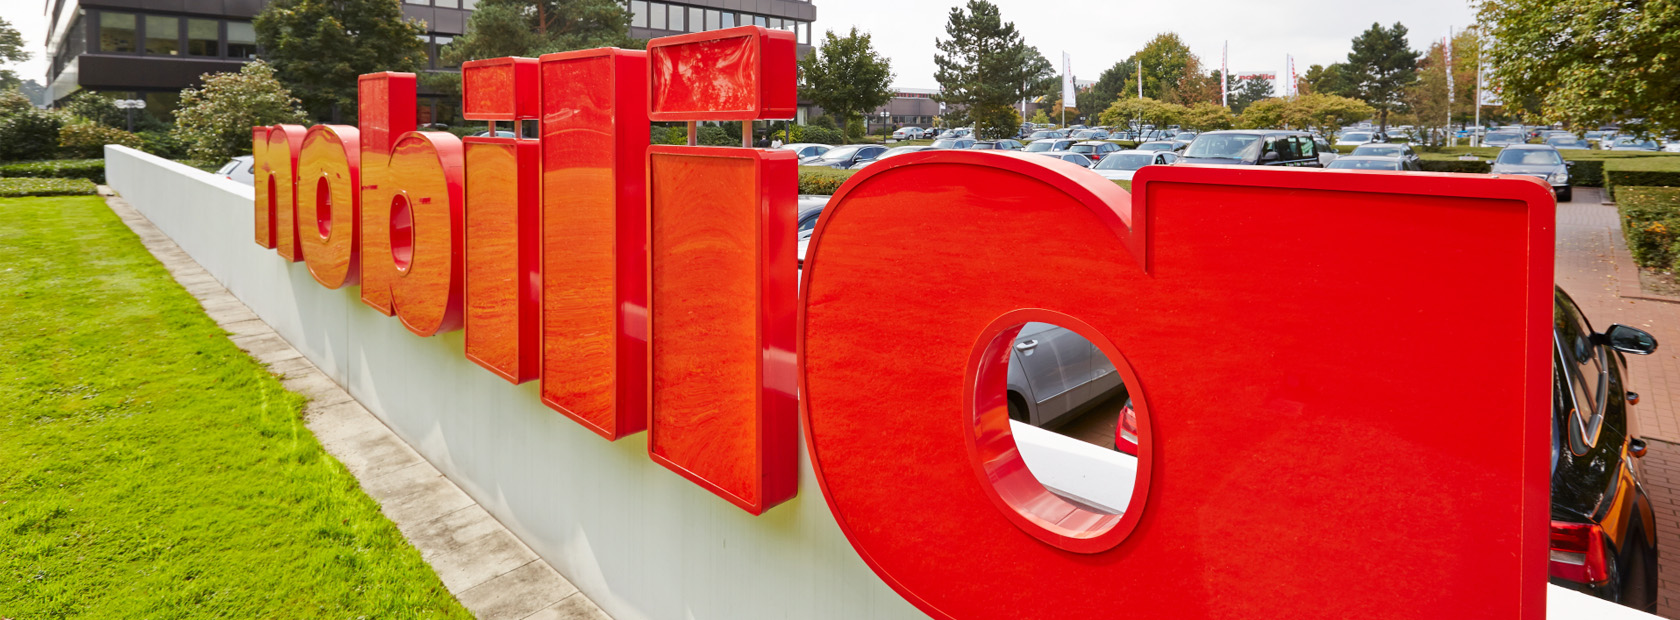 Red three-dimensional letter signs forming a word installed outdoors, with lush greenery and a modern building in the background.